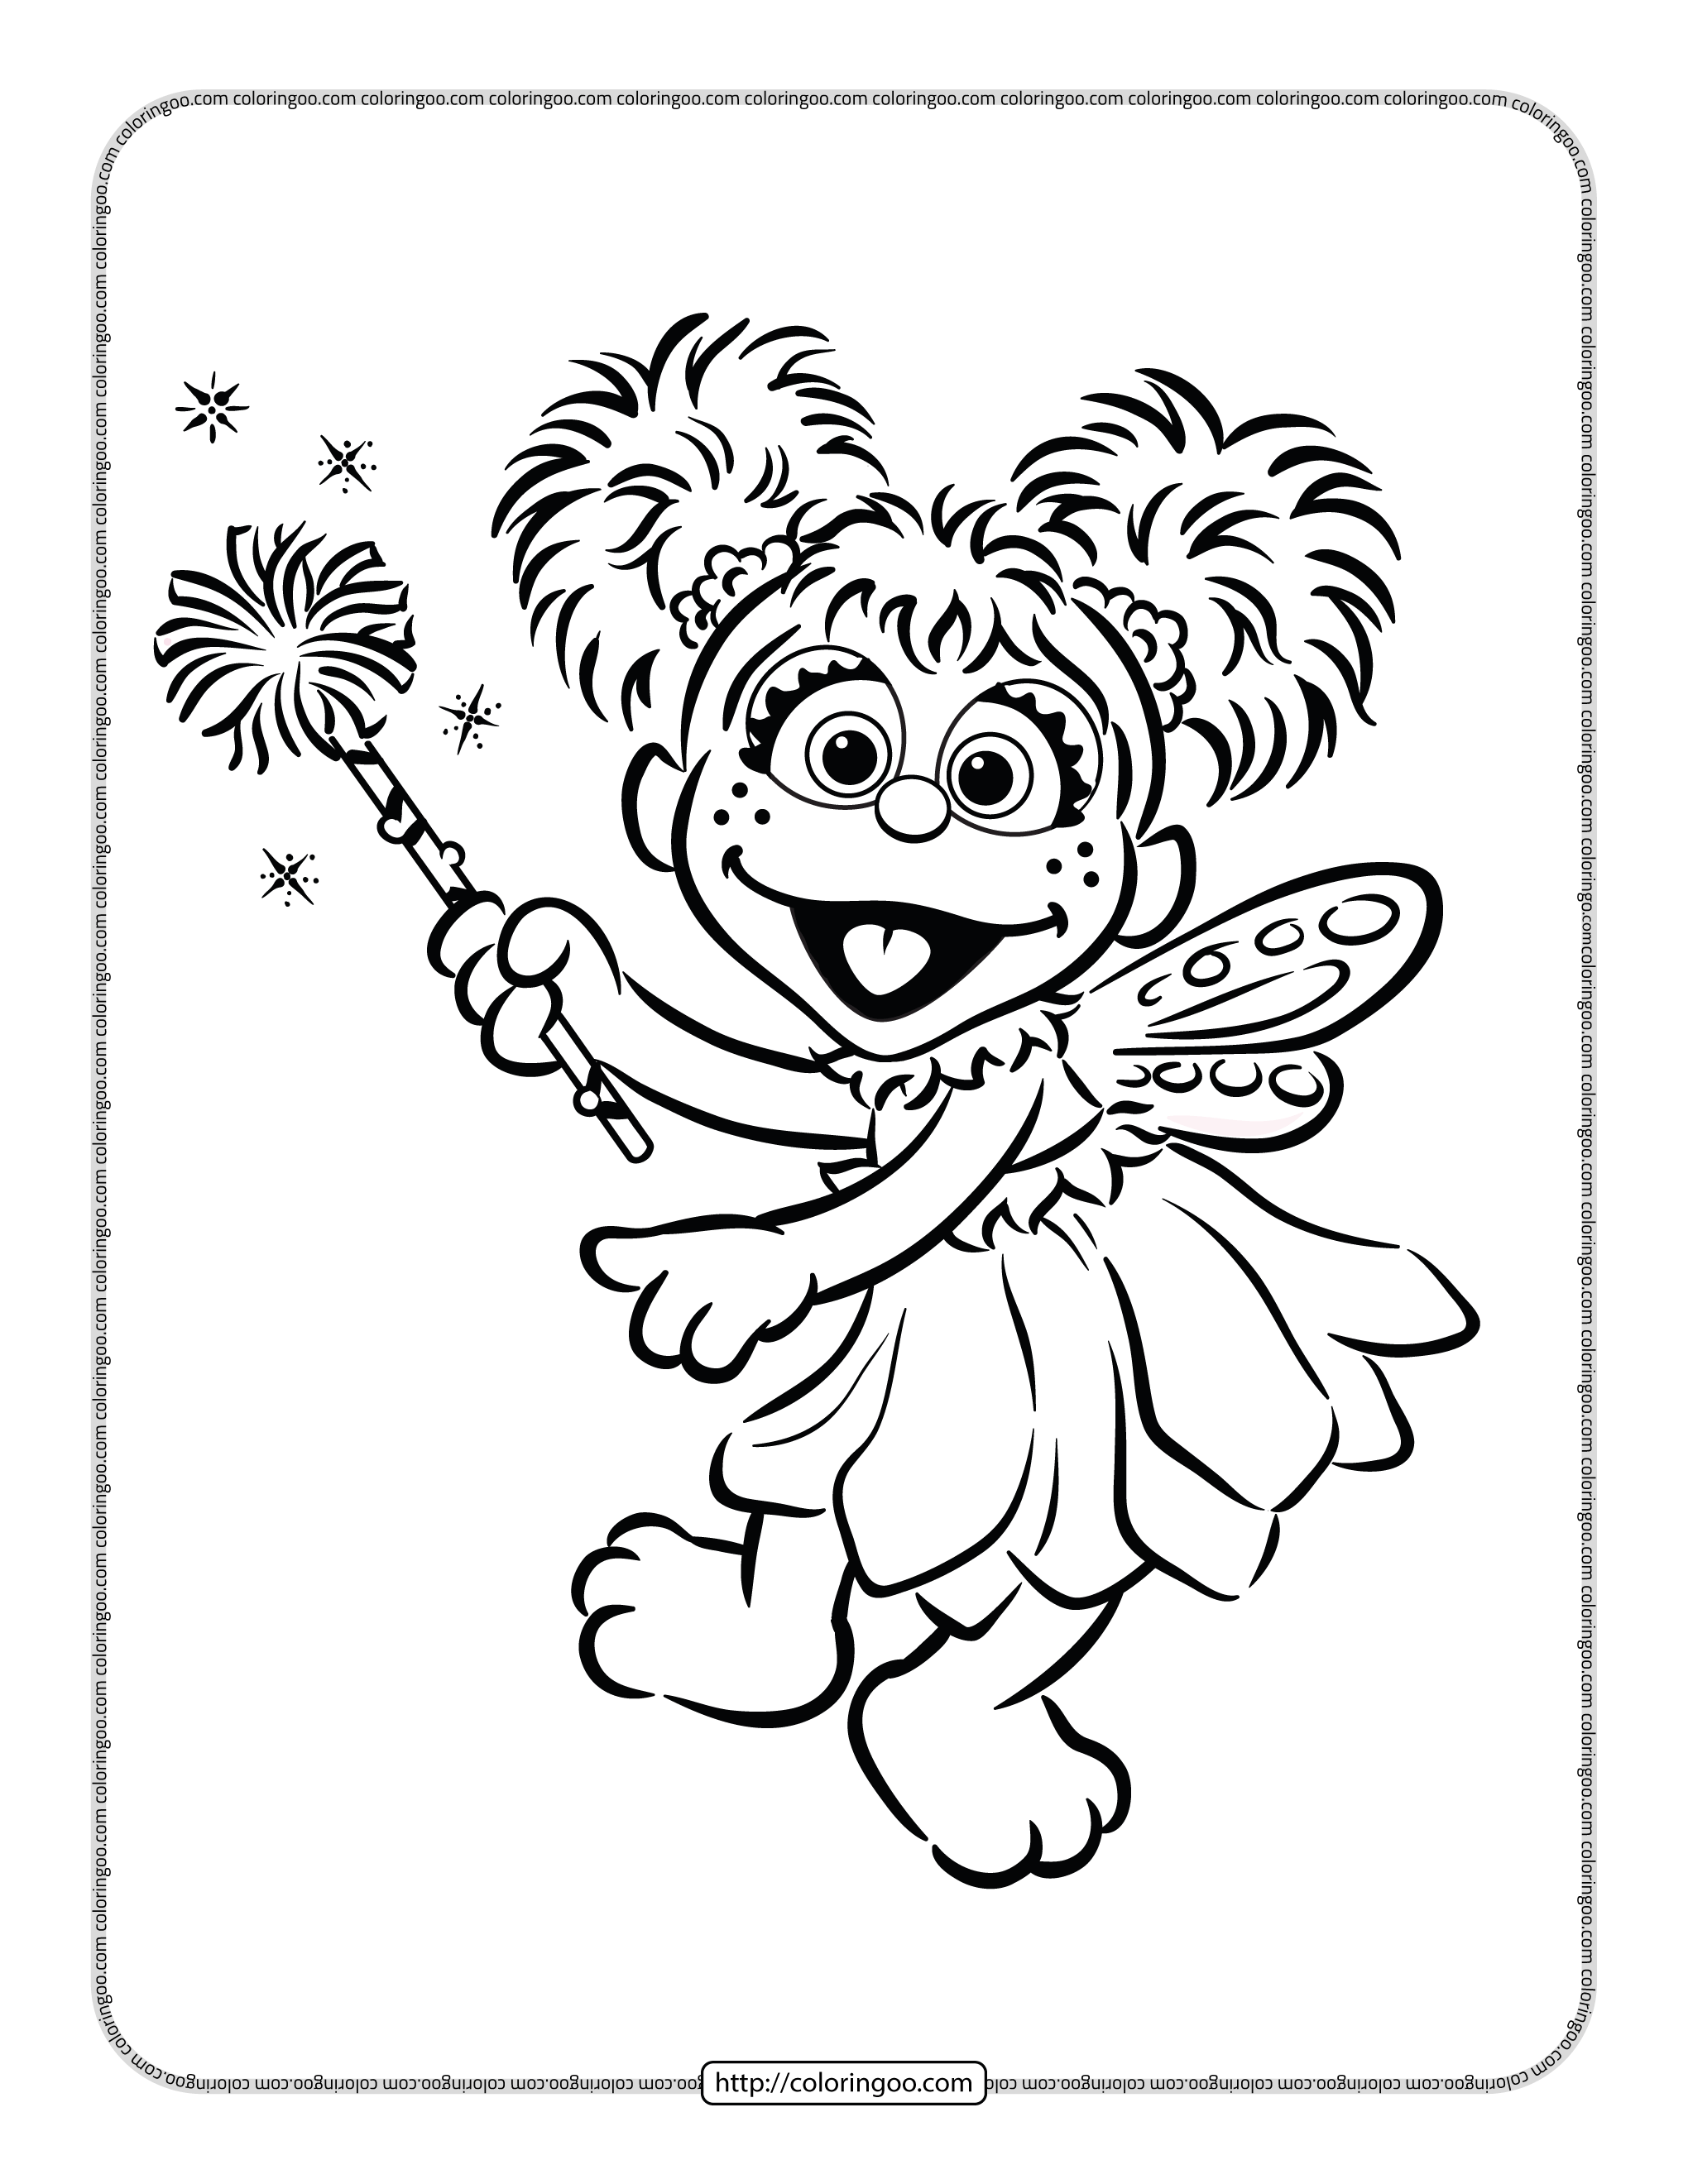 sesame street abby cadabby coloring pages